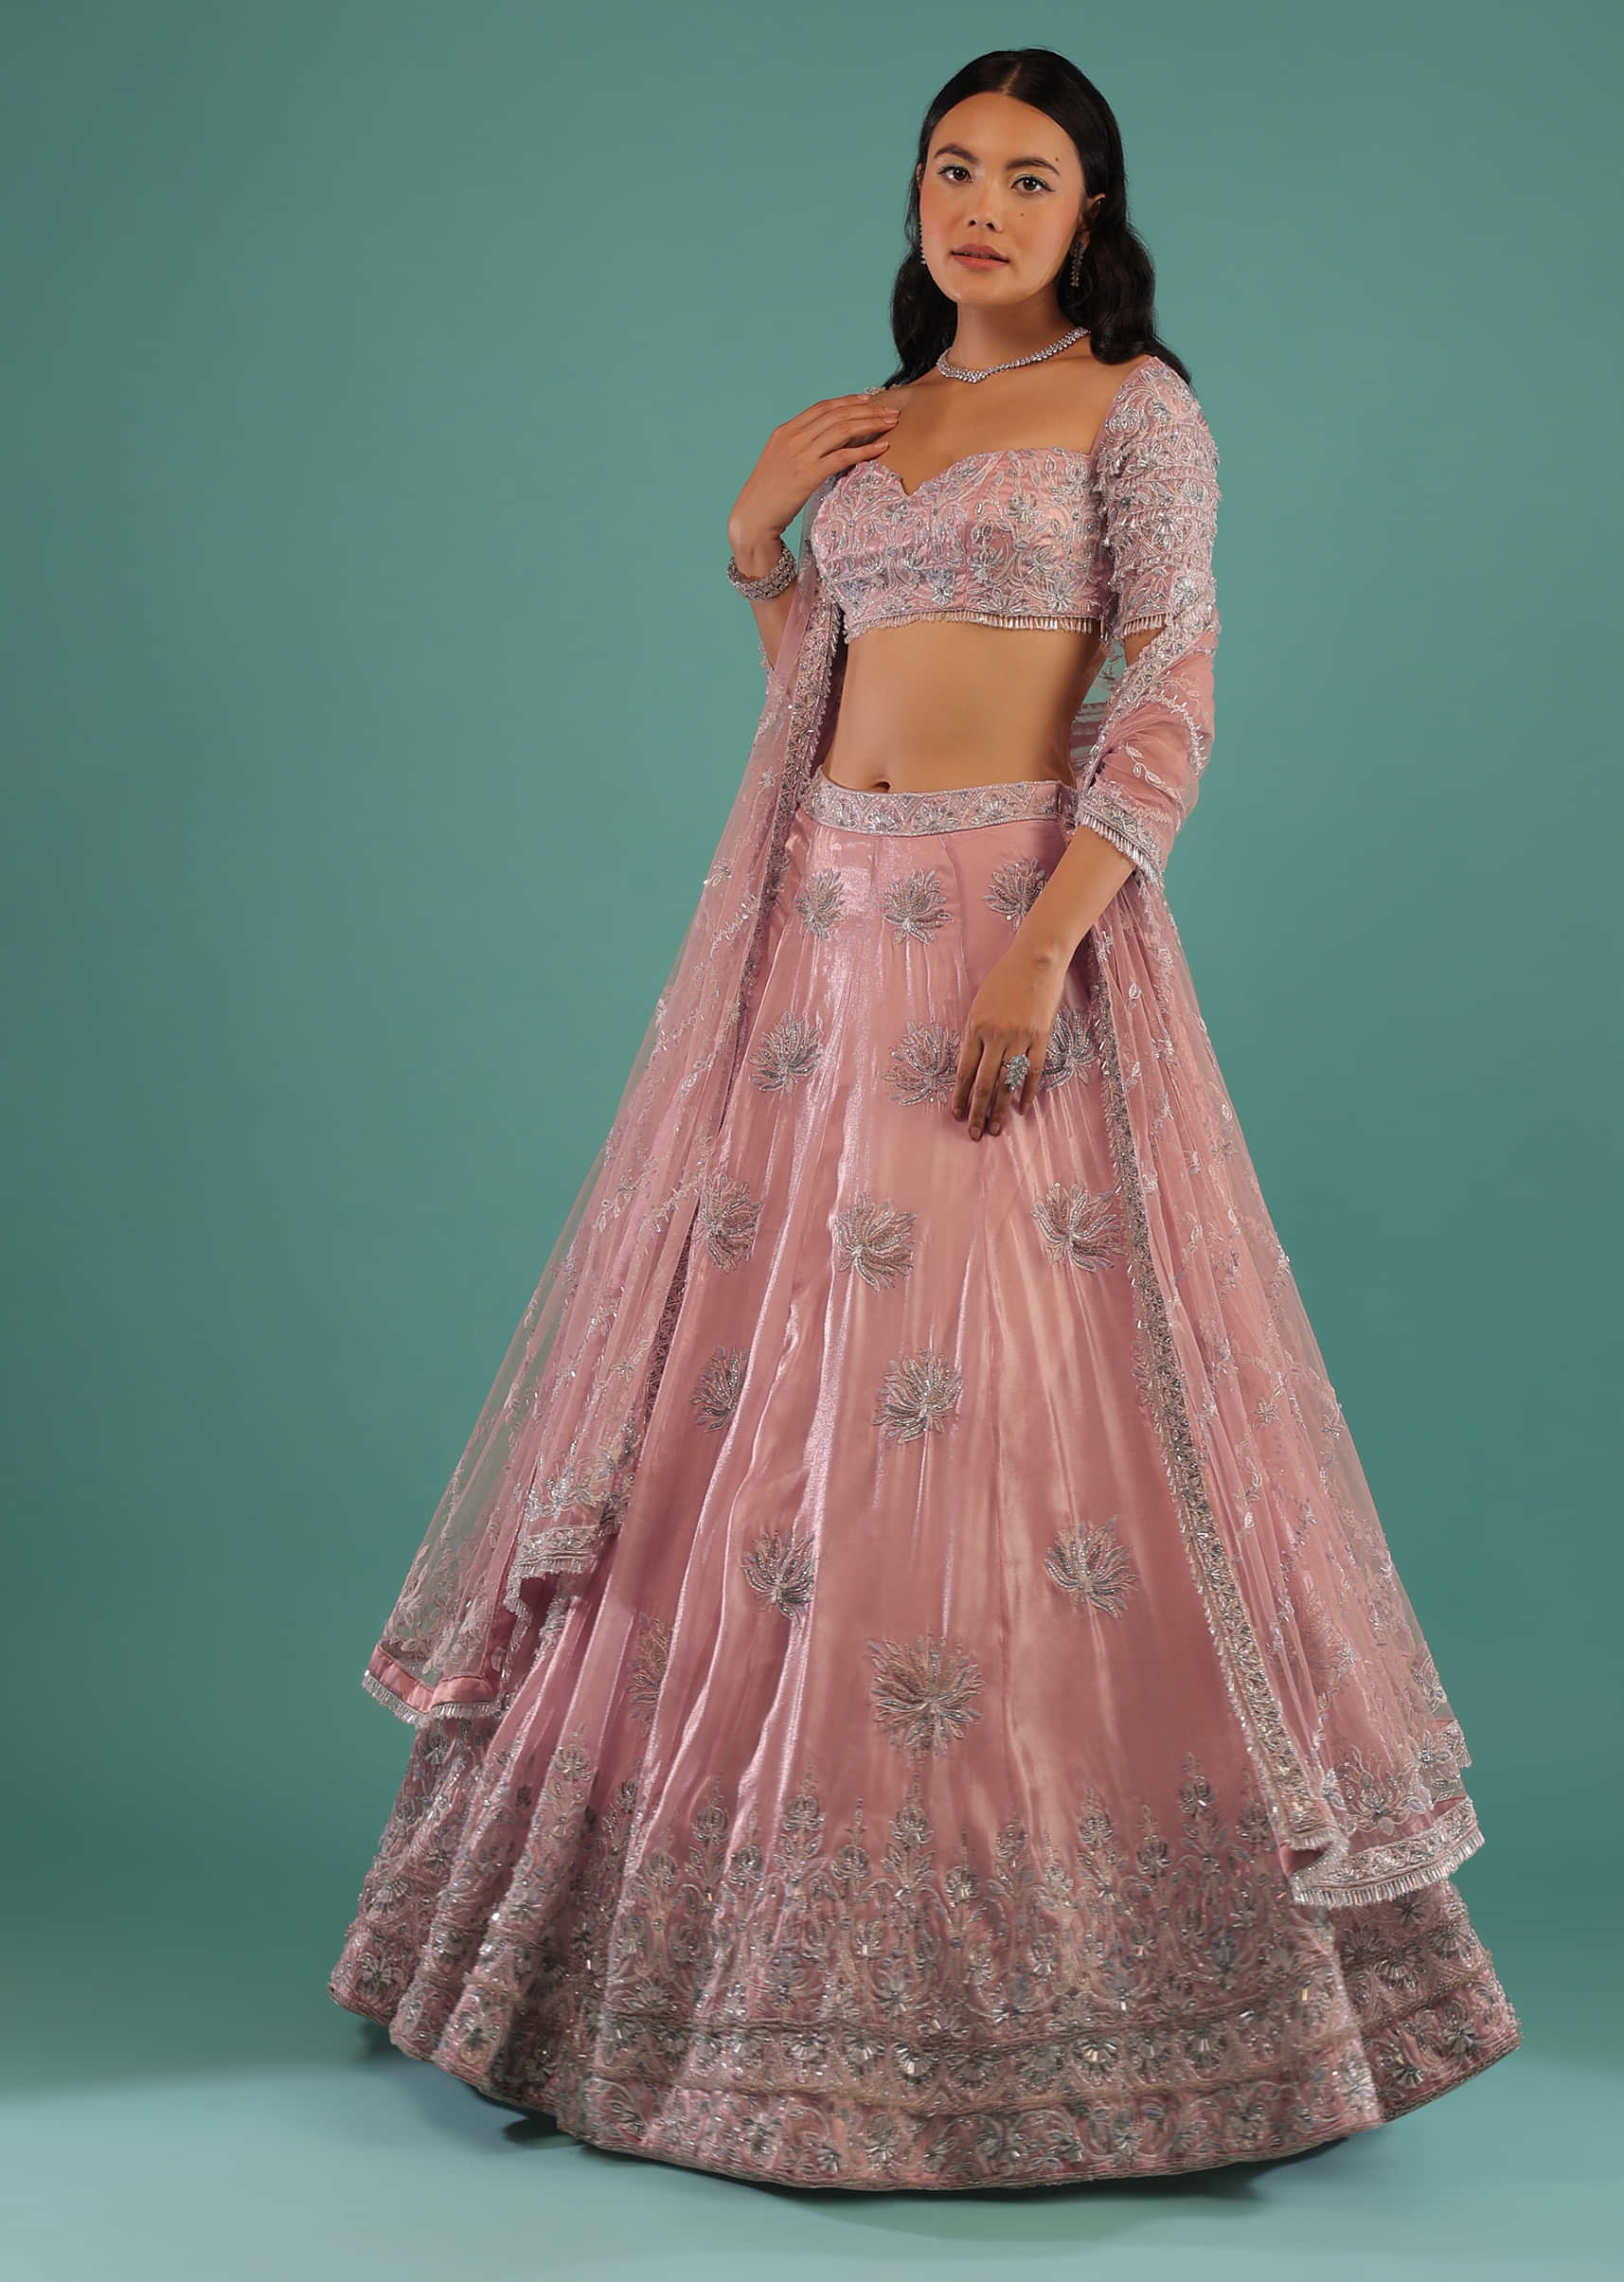 Powder Pink Lehenga And Off Shoulder Crop Top In 3D Floral Motifs Embroidery Paired With A Matching Net Dupatta